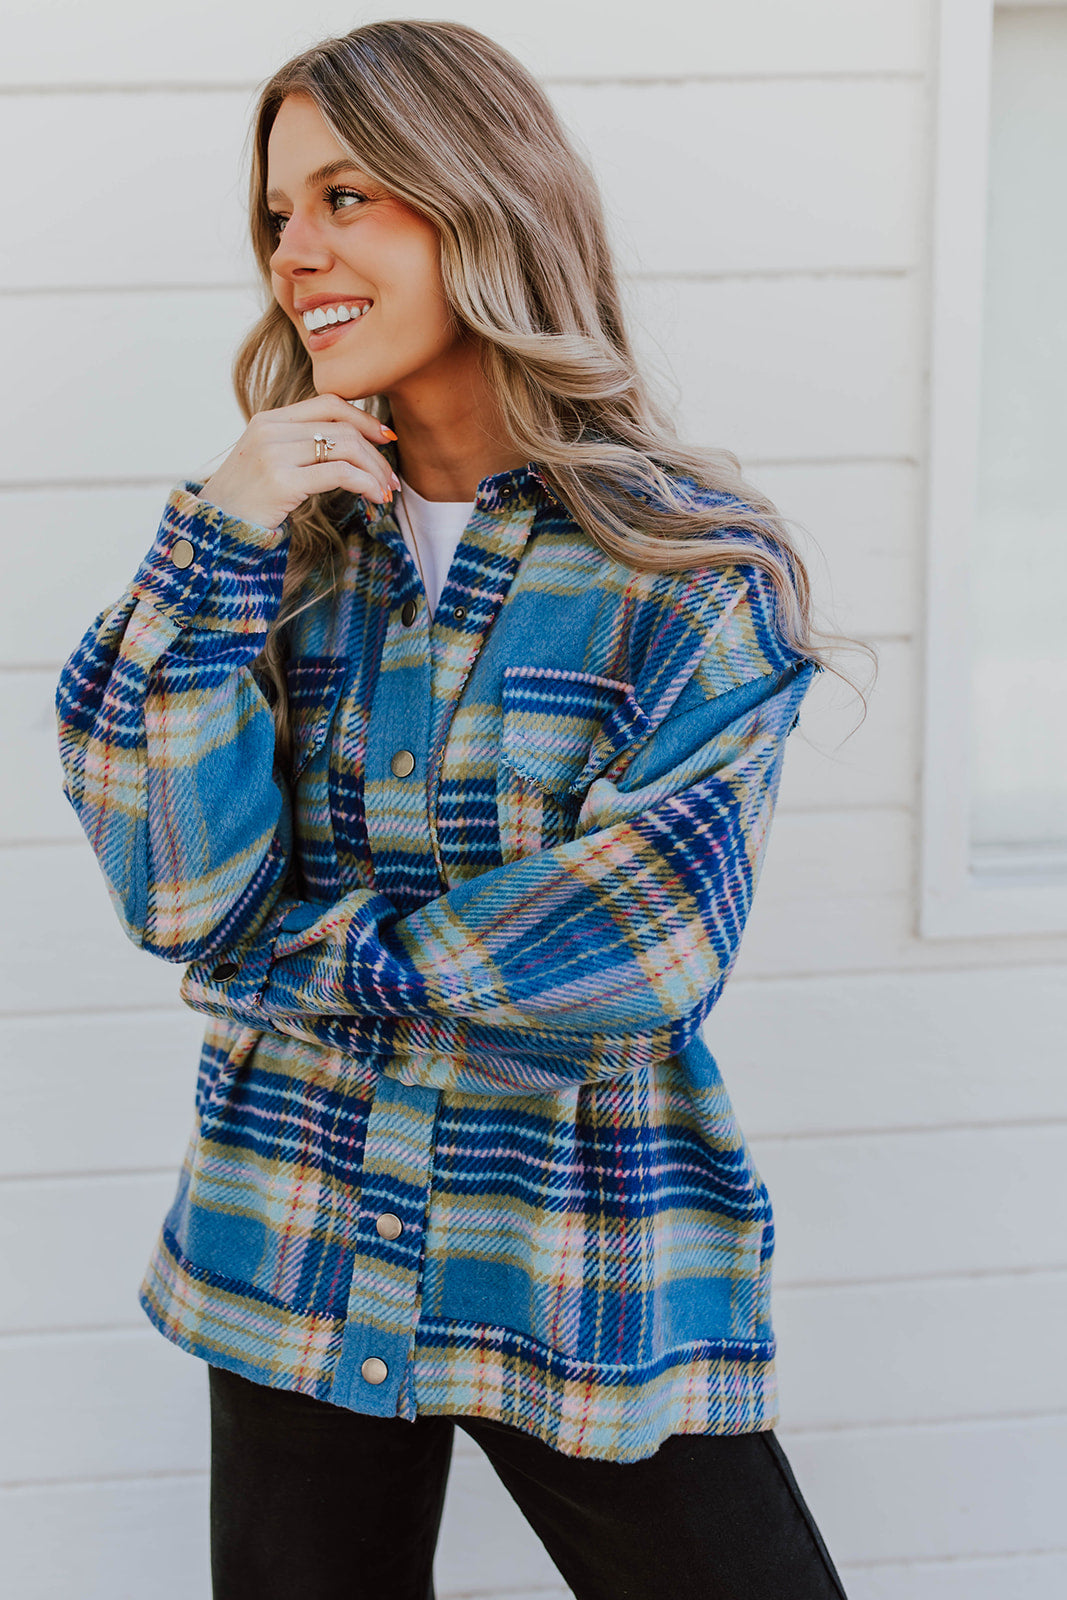 THE HAILEE SHACKET IN BLUE PLAID